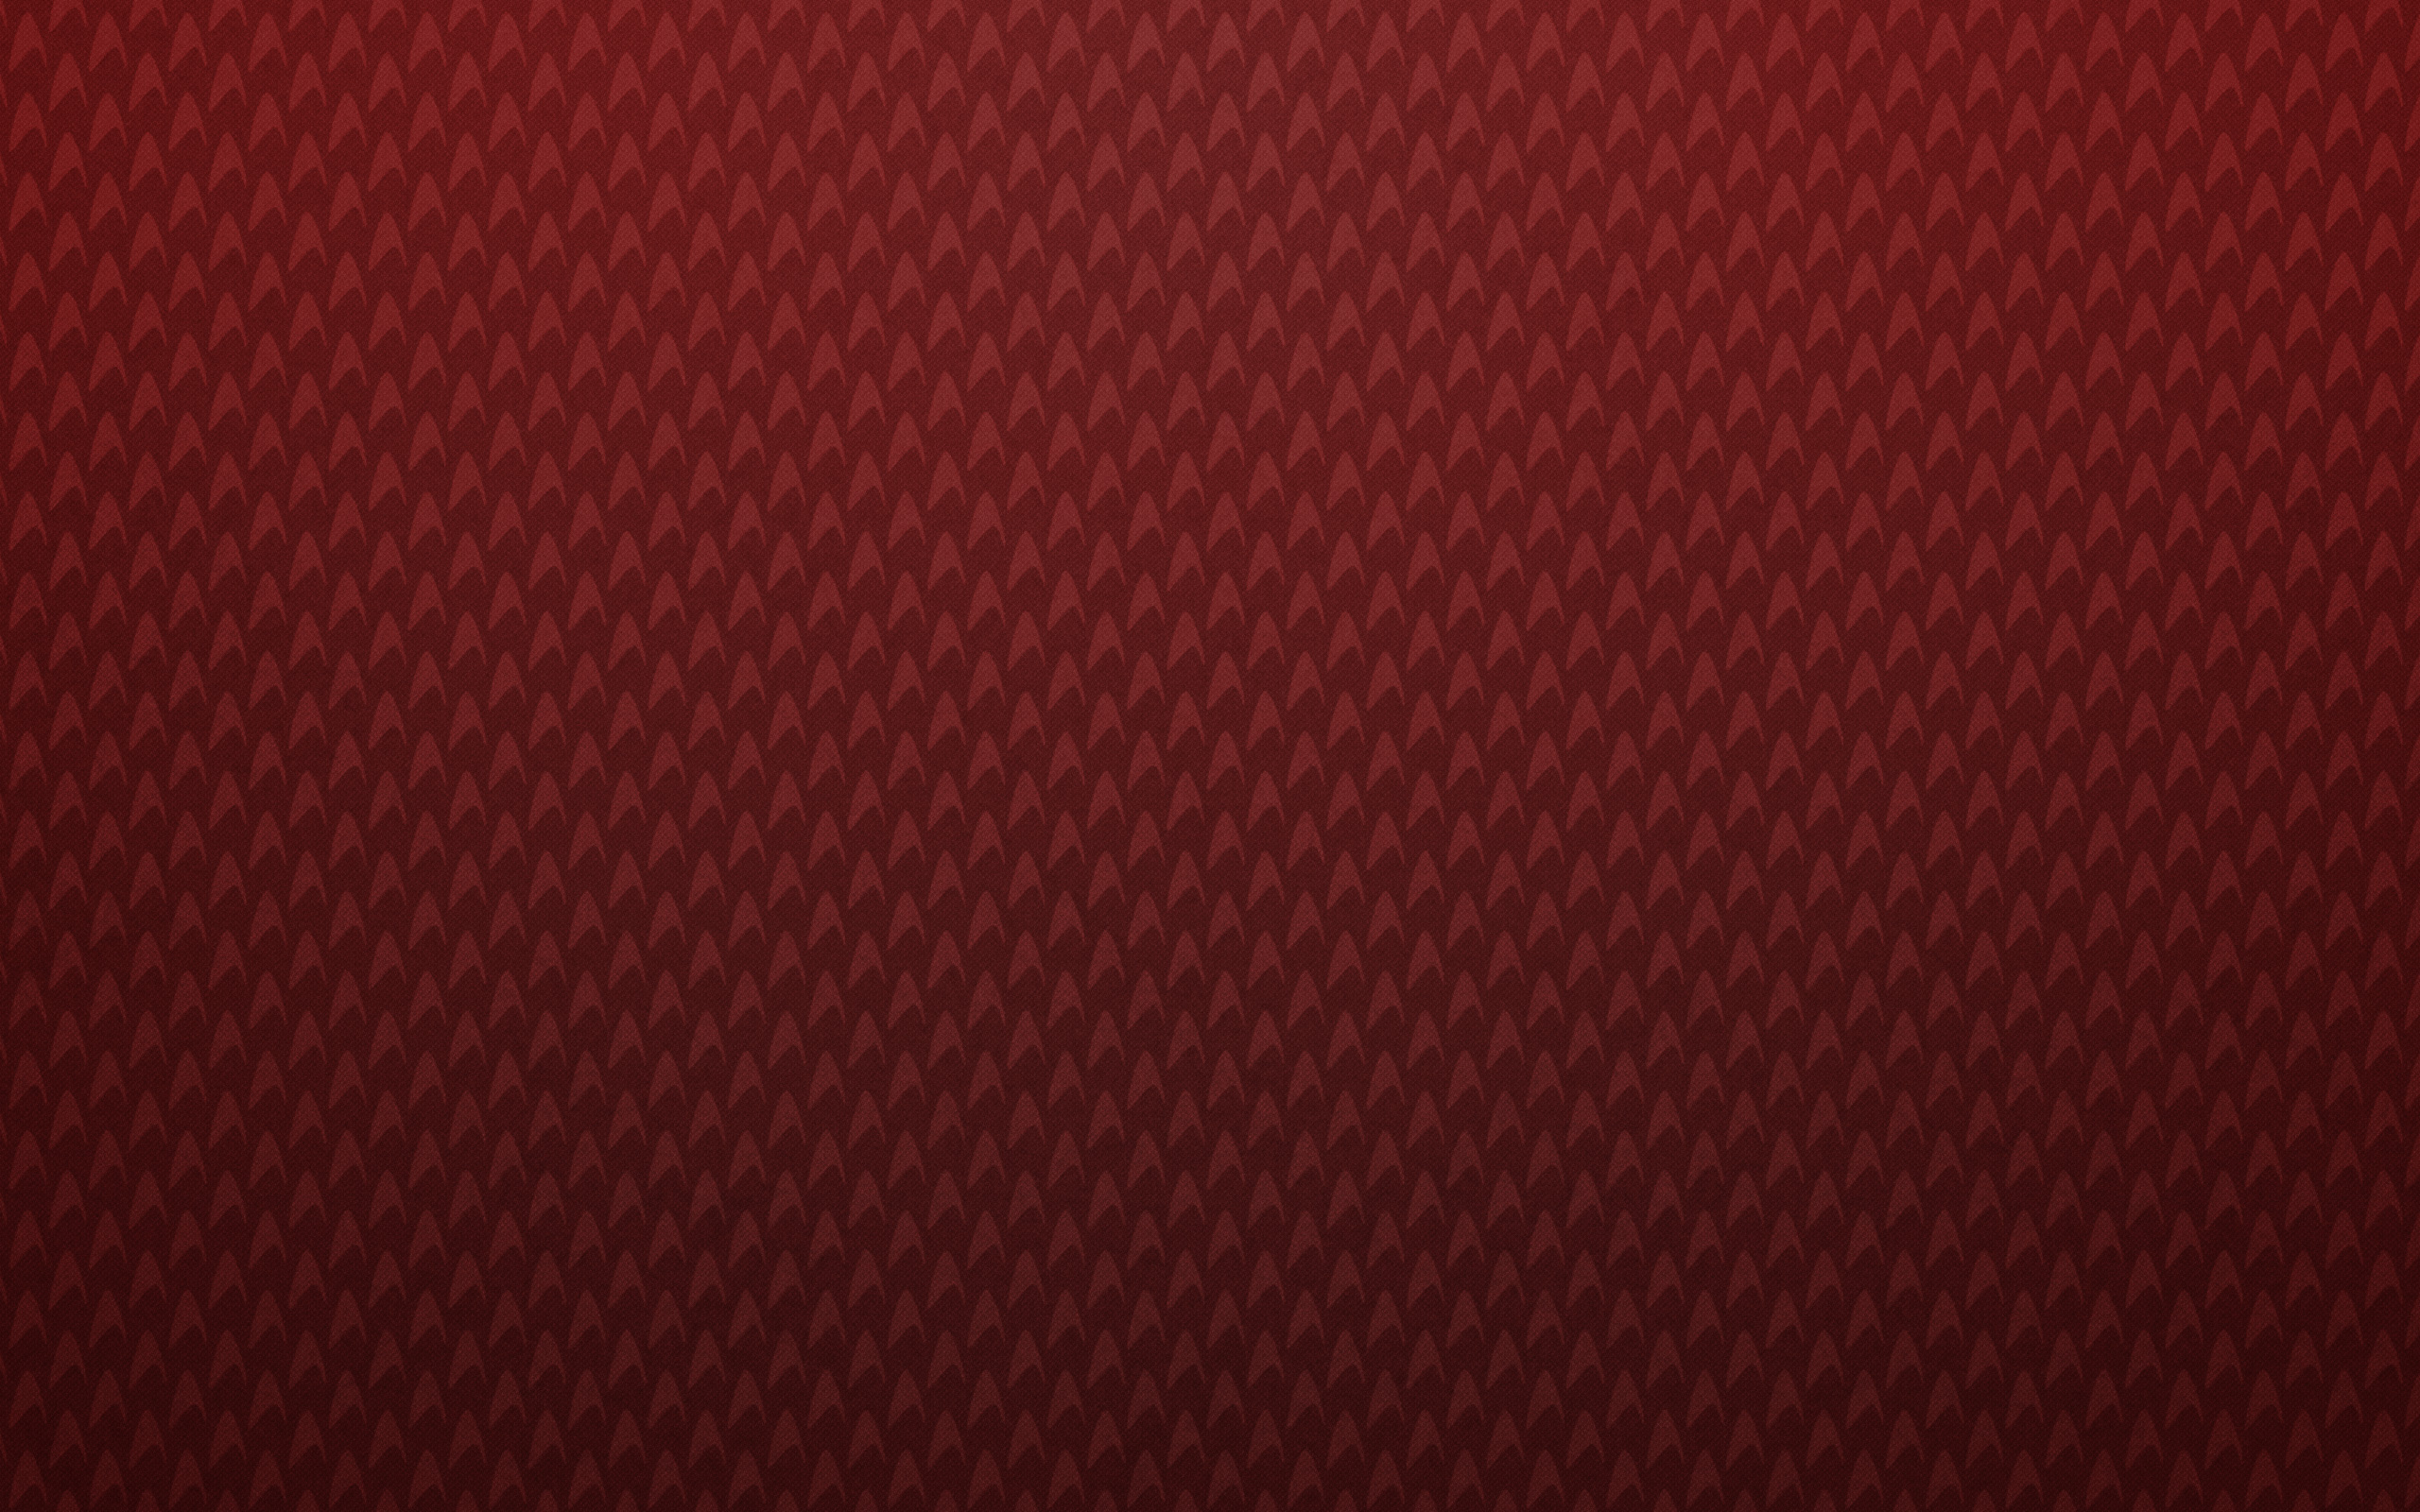 red, Patterns, Textures, Backgrounds, Triangle, Star, Trek, Logos